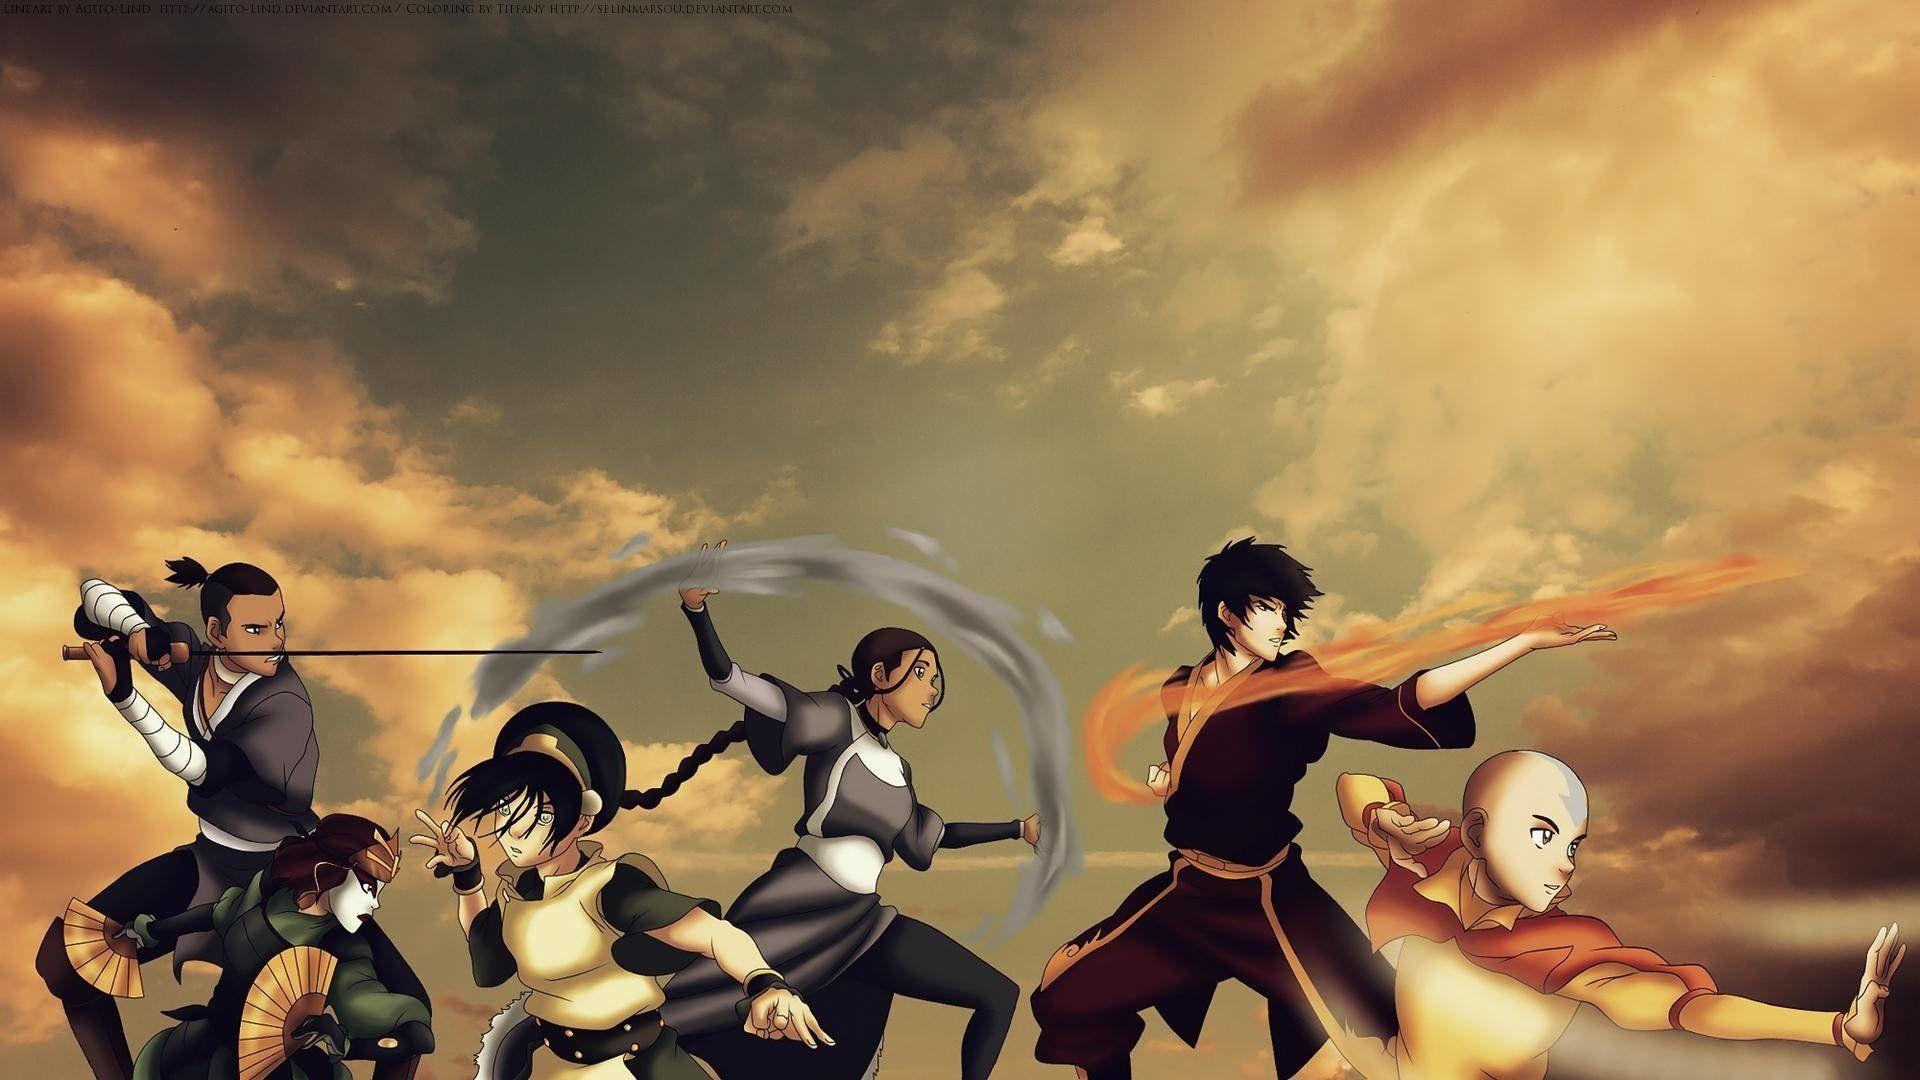 The Last Airbender HD Wallpaper. Background .: The Last Airbender Wallpaper